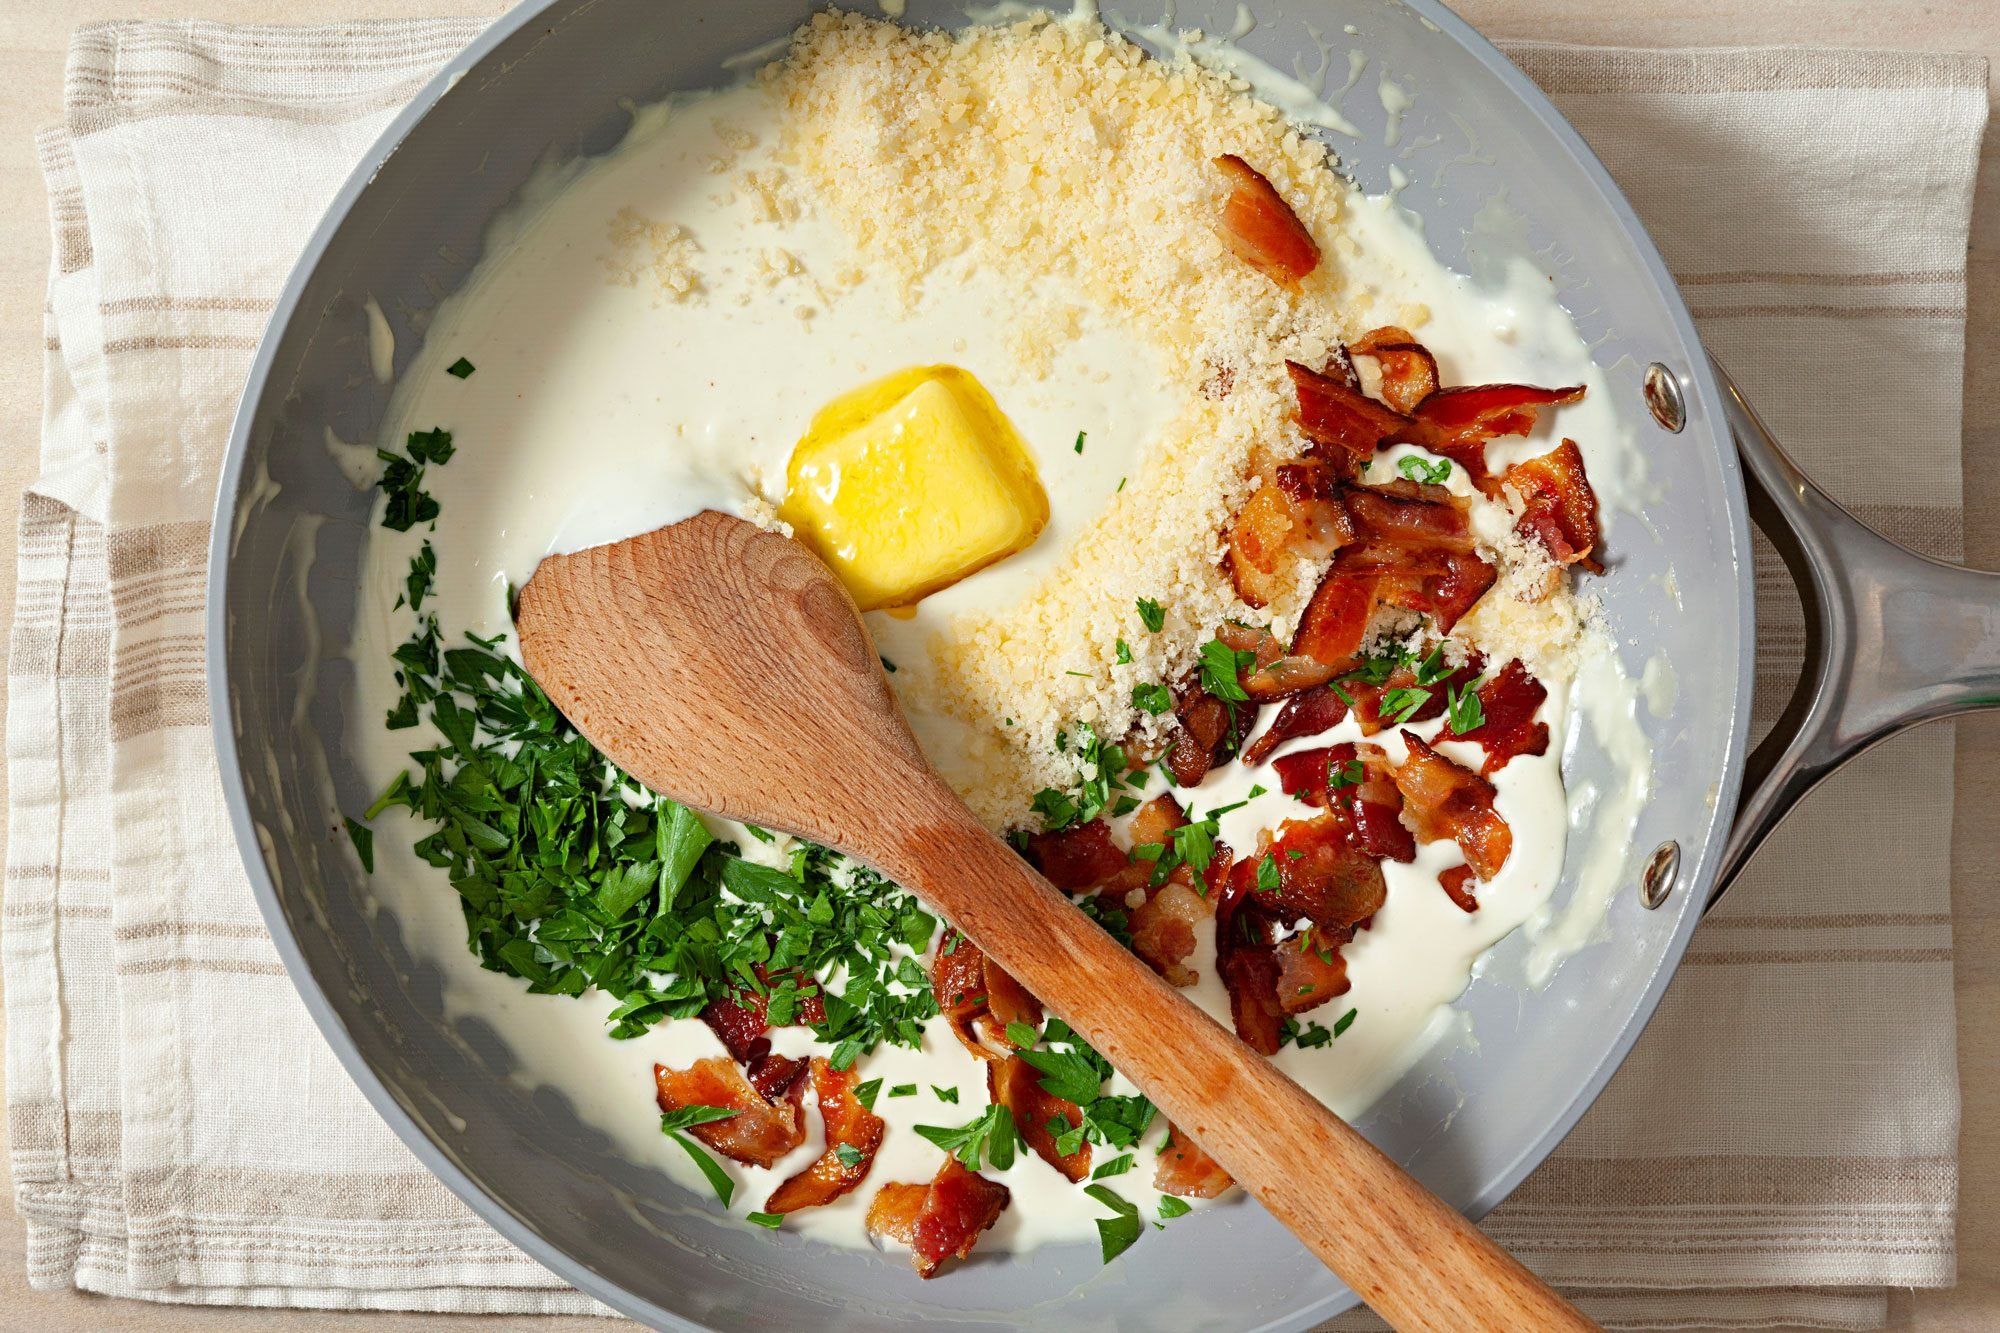 Add the butter, Parmesan cheese, crumbled bacon, fresh parsley and salt to the skillet with the reduced cream mixture